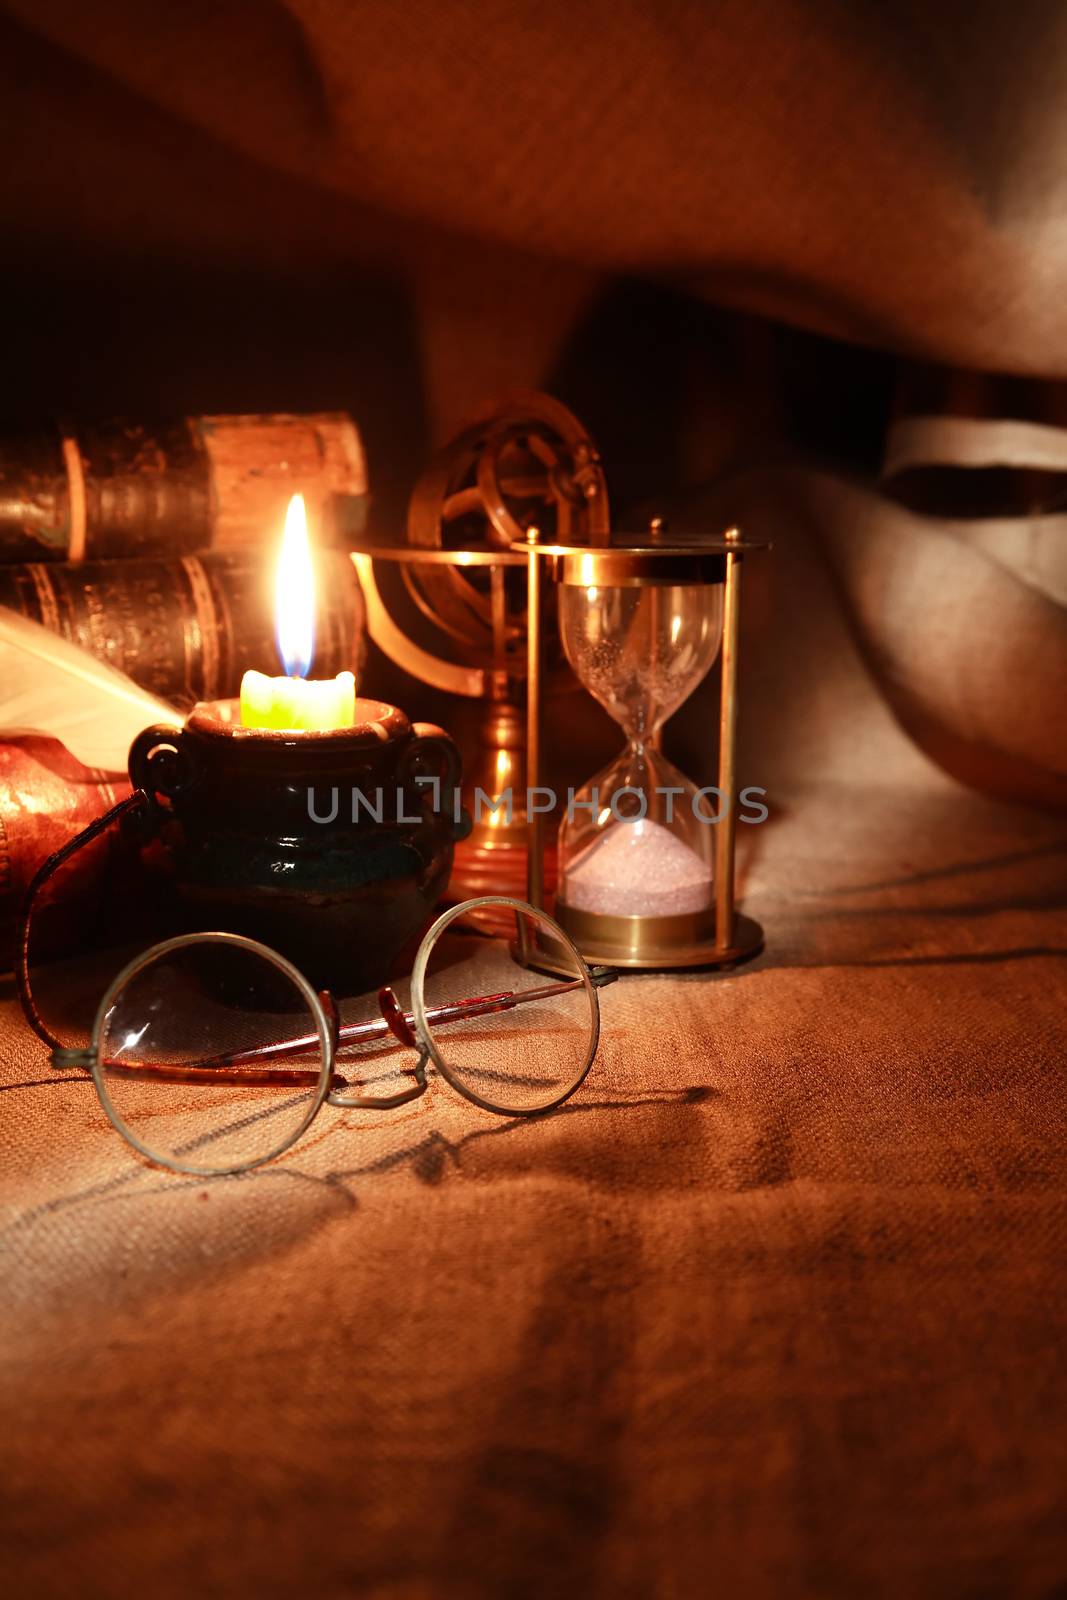 Vintage still life with lighting candle near old things